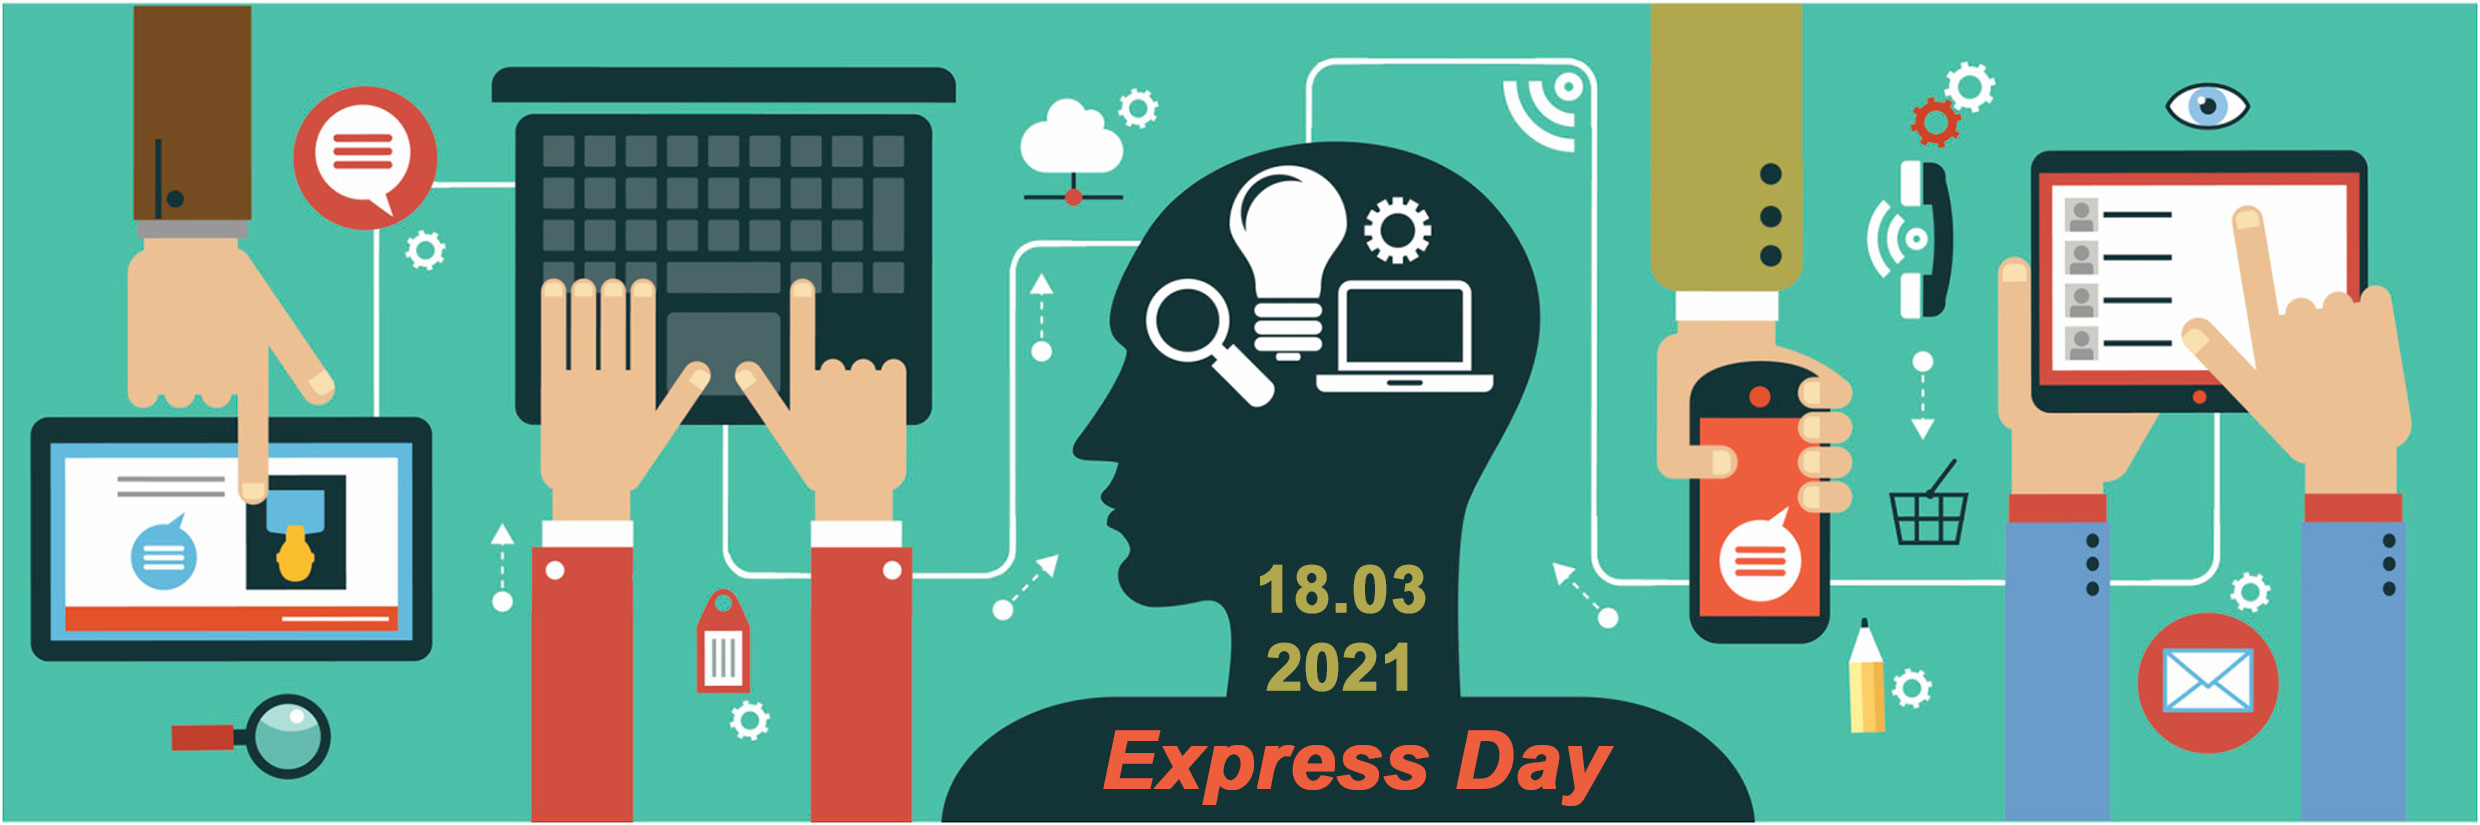 Express day 210318